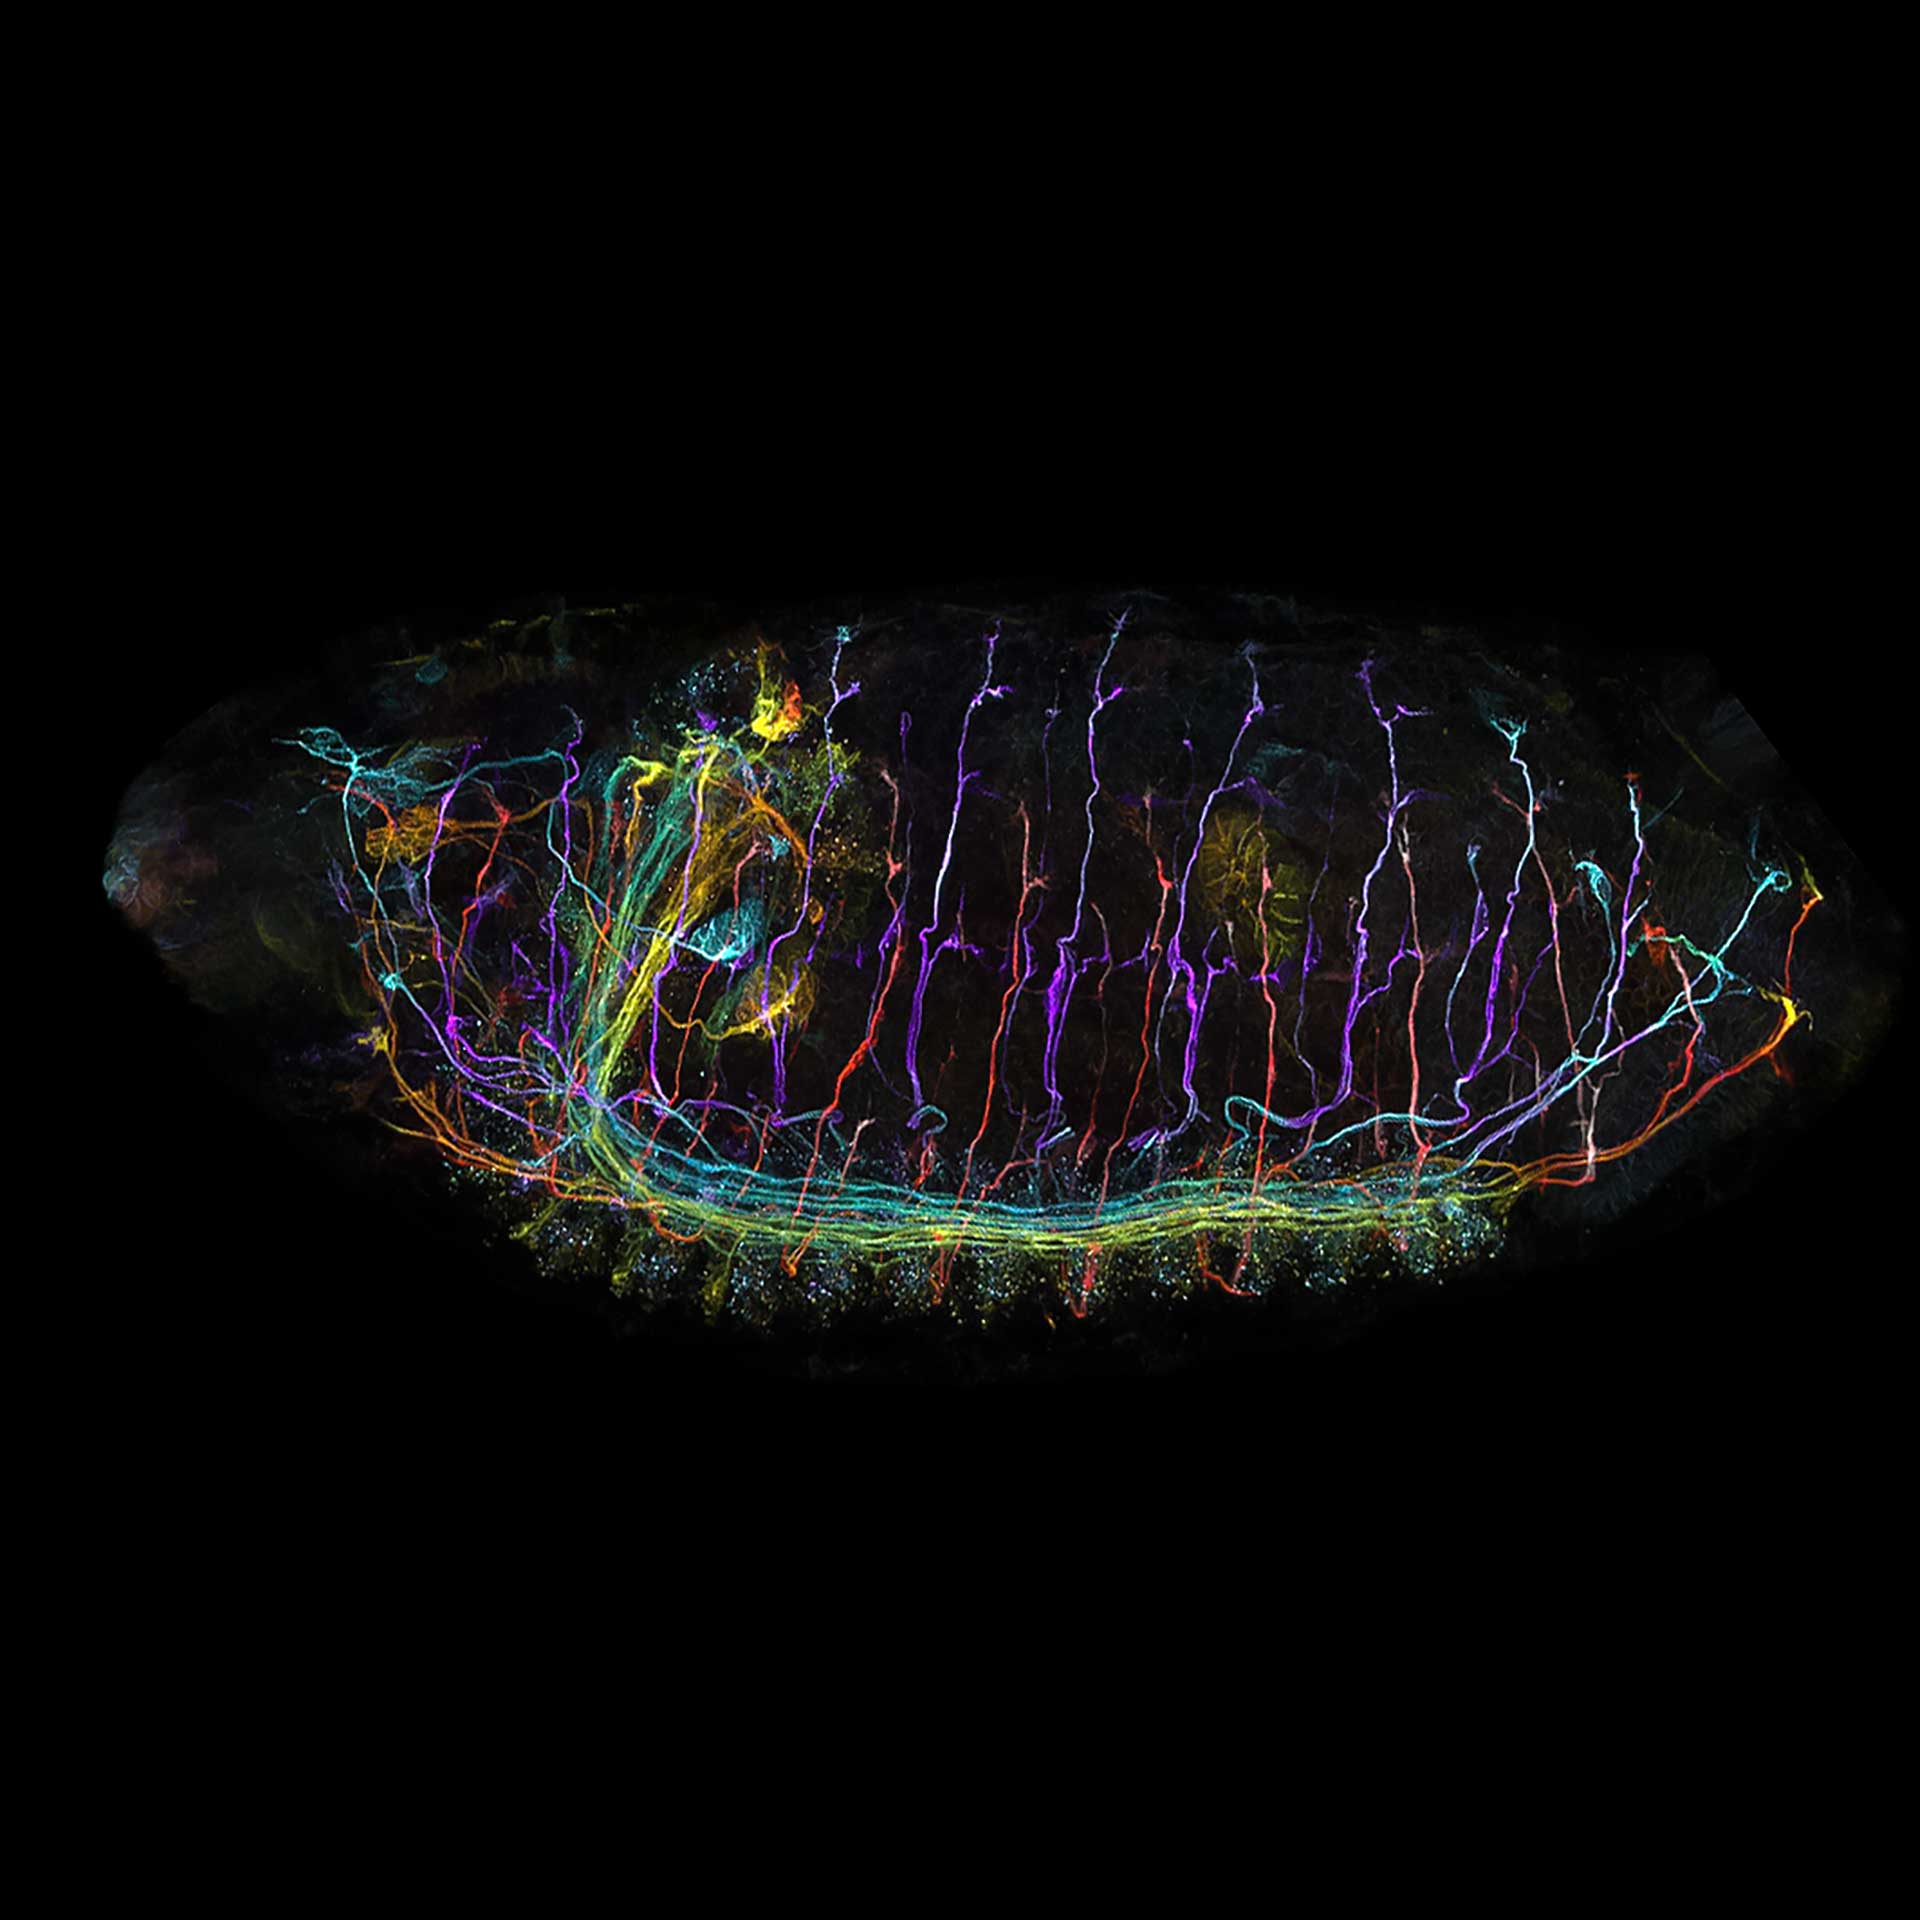 Drosophila embryo imaged with Airyscan Multiplex mode. Sample courtesy of J. Sellin, LIMES, Germany